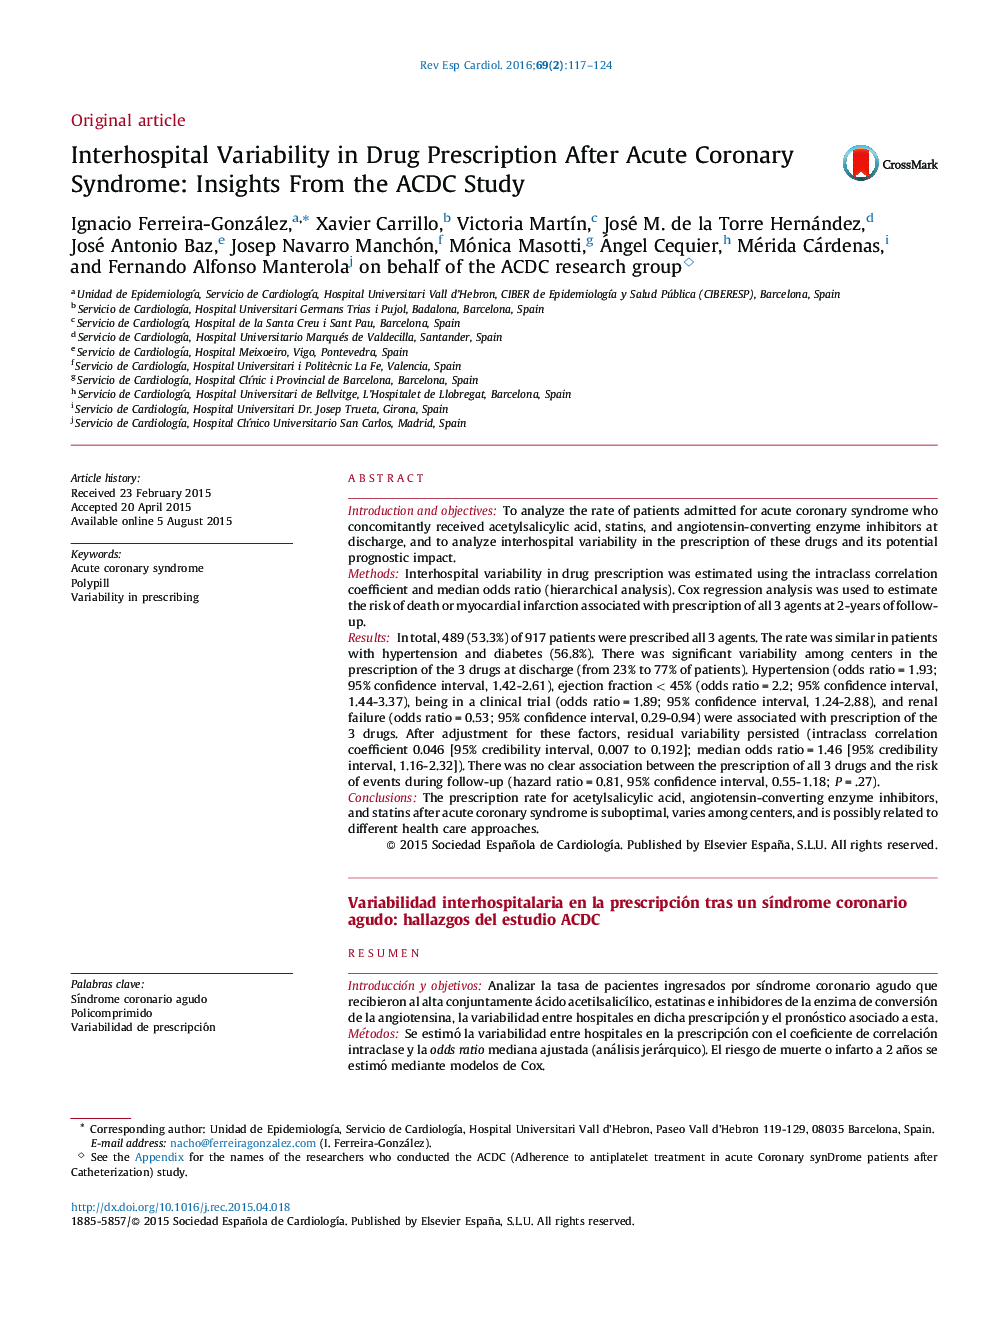 Interhospital Variability in Drug Prescription After Acute Coronary Syndrome: Insights From the ACDC Study